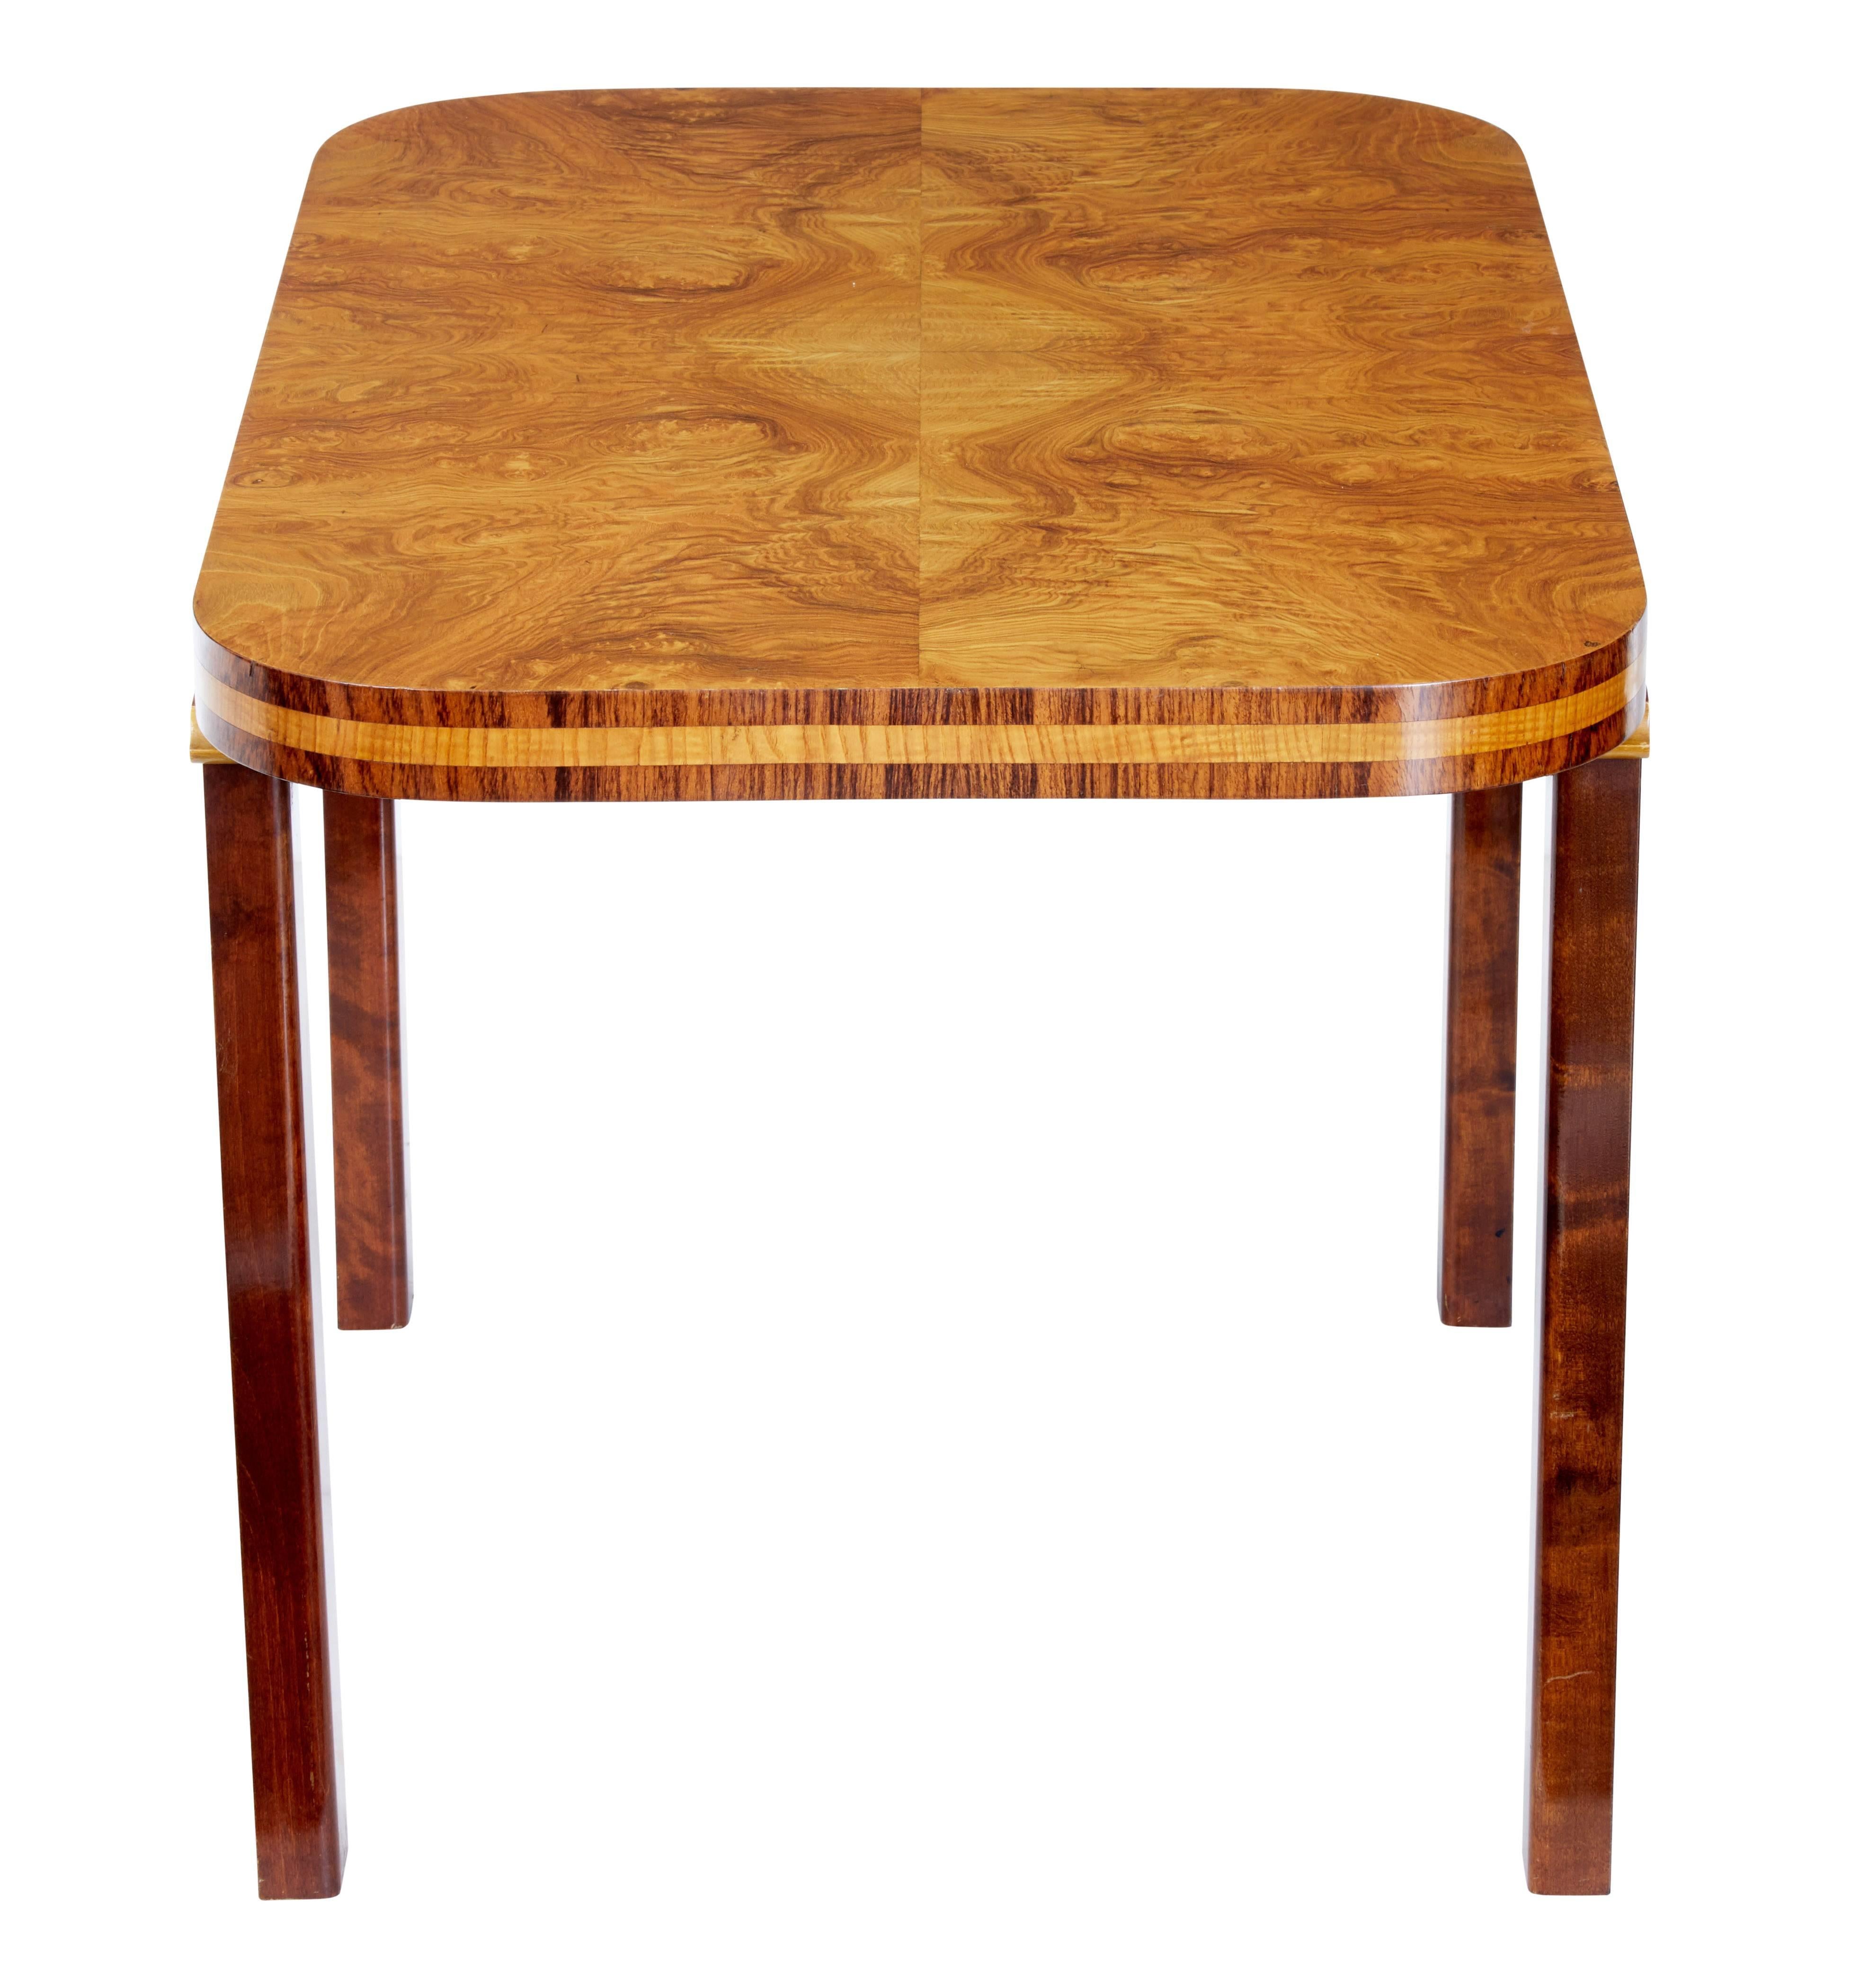 Beautiful quality Art Deco inspired coffee.

Made from fine quality elm root timber with quarter matched veneers.

Crossbanded with kingwood to the top edge and legs. Stylised column detail to the top of the legs.

Very minor surface marks to